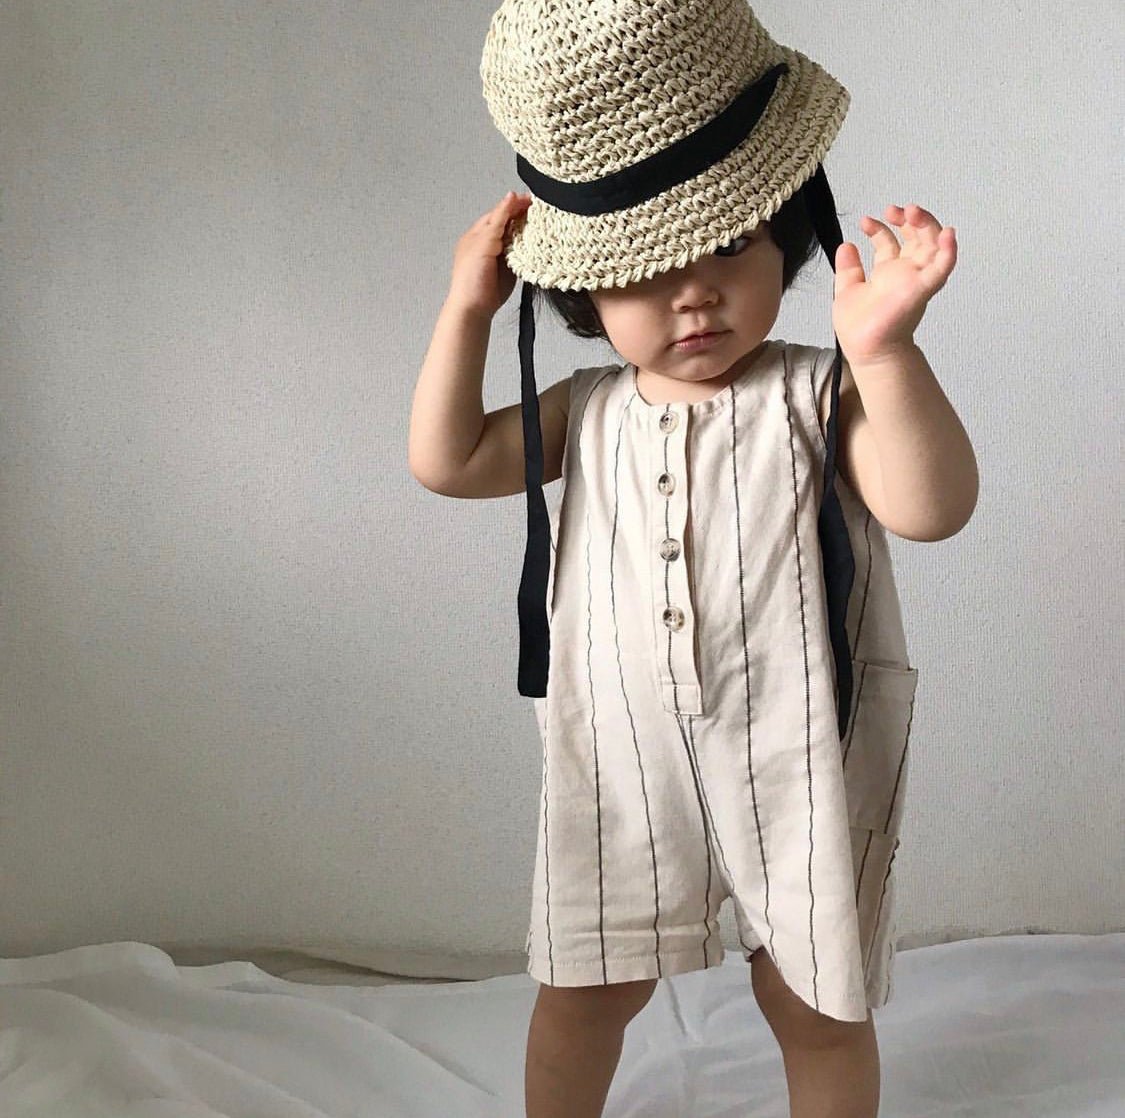 Mont Overall find Stylish Fashion for Little People- at Little Foxx Concept Store